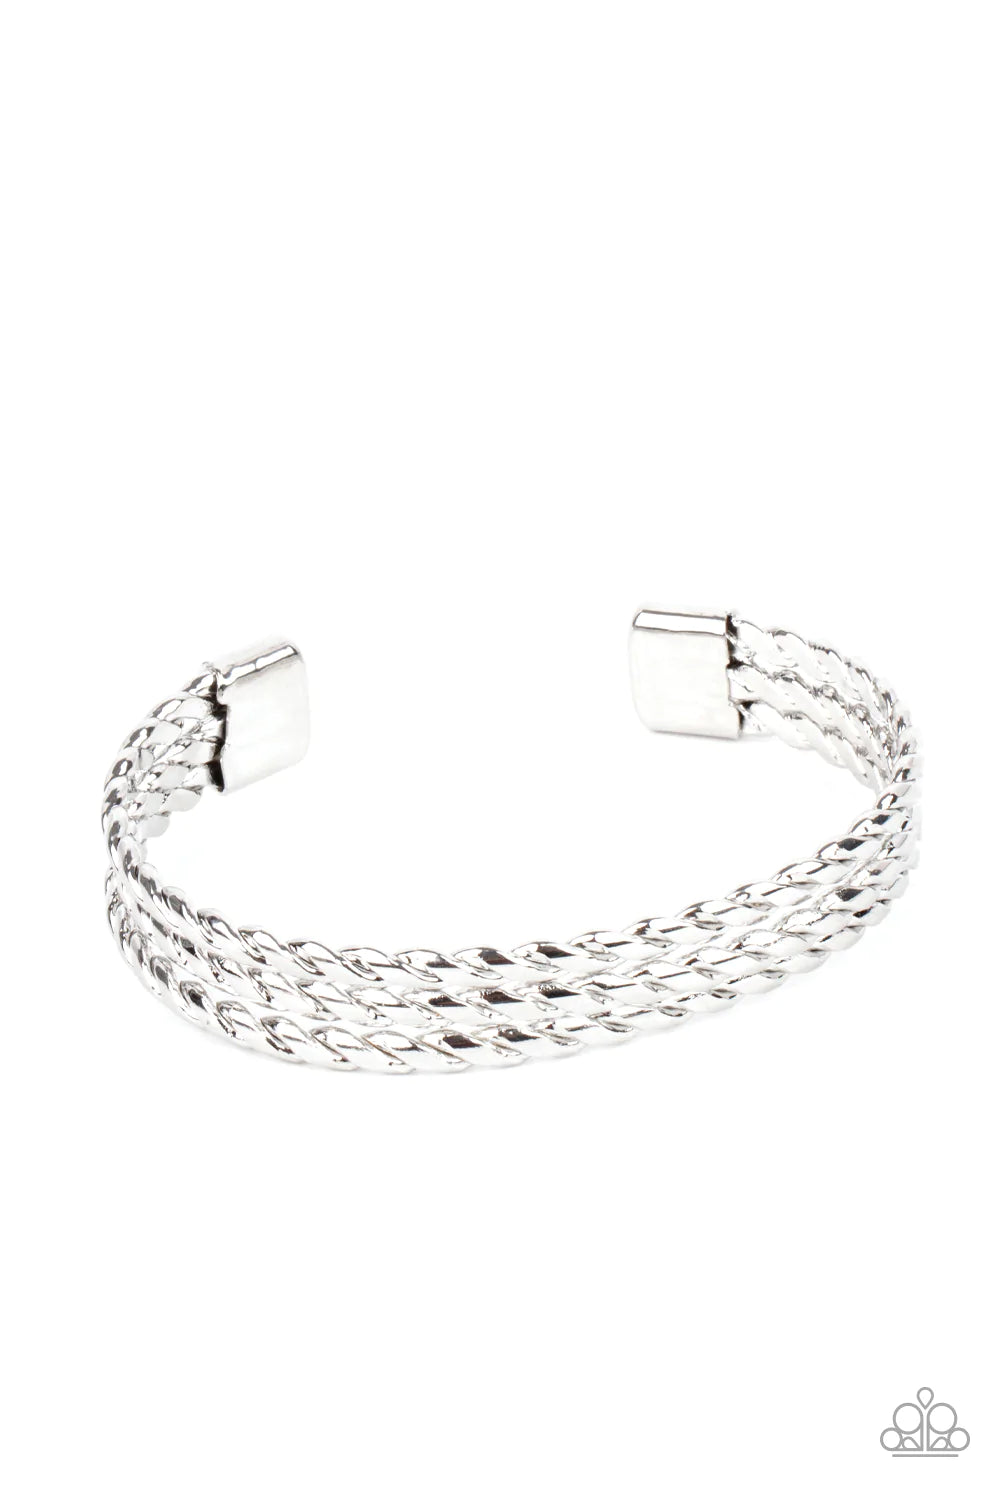 Paparazzi Line of Scrimmage Mens Bracelets Clearance